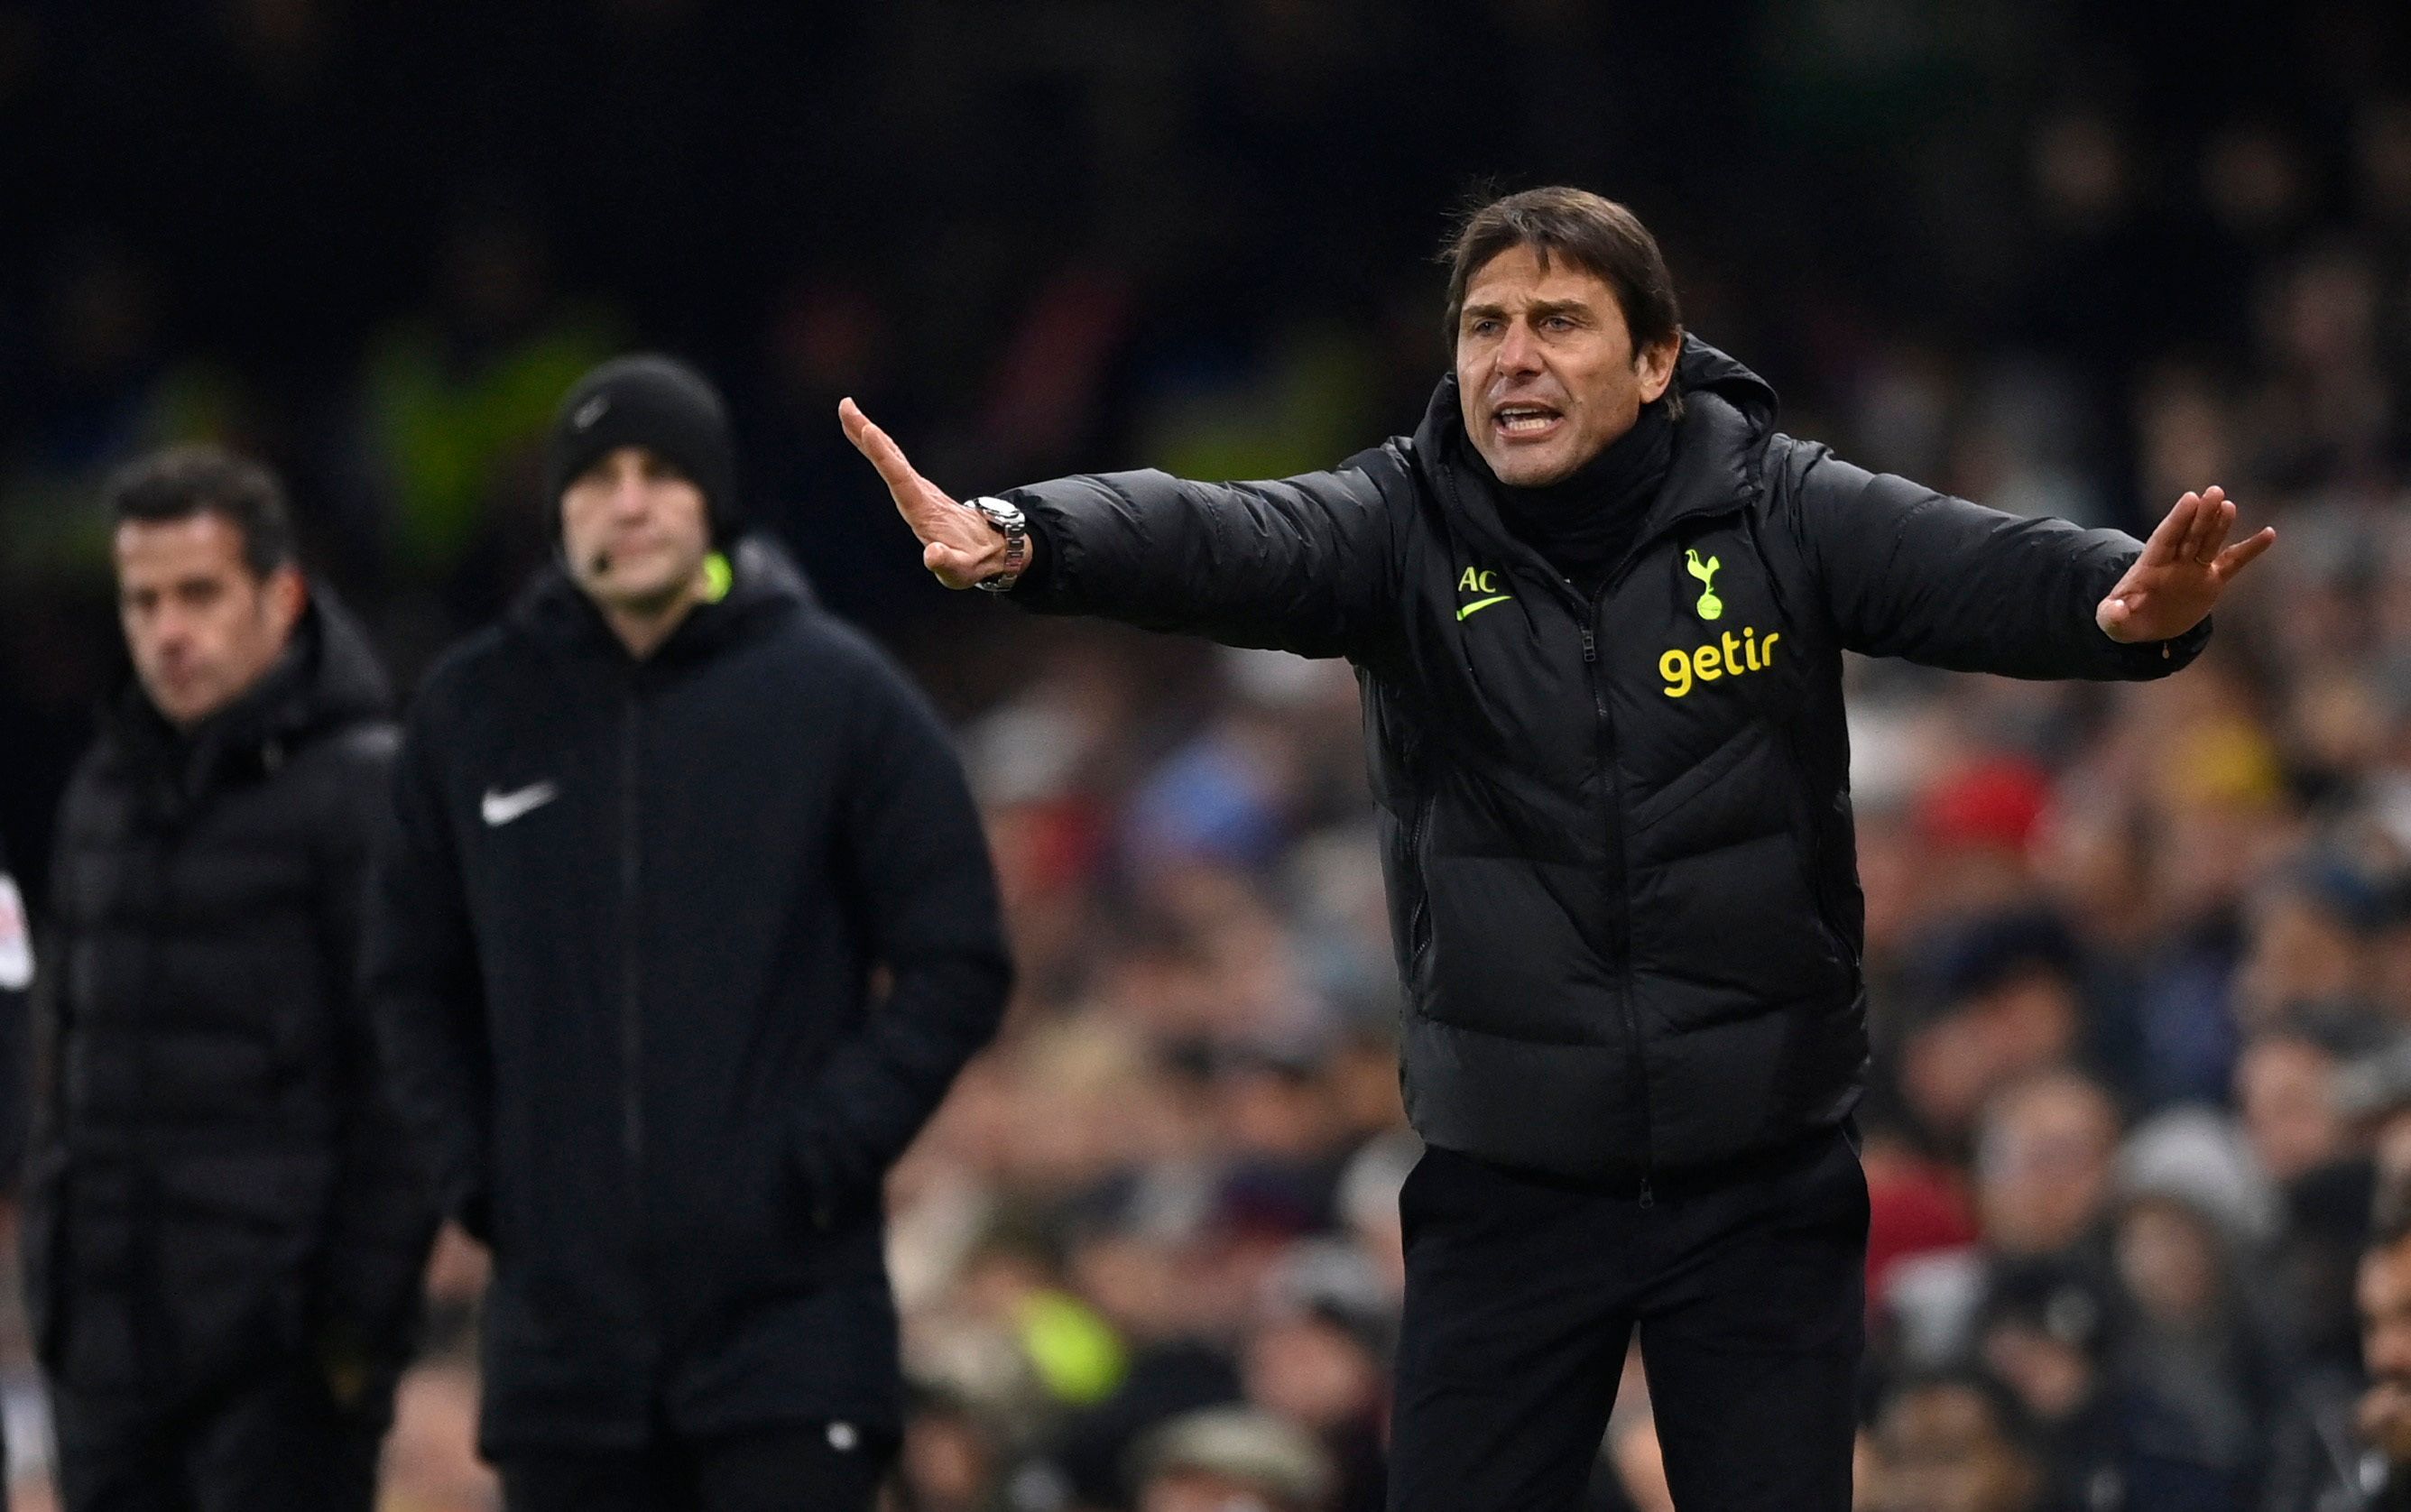 Tottenham Hotspur manager Antonio Conte giving instructions to player